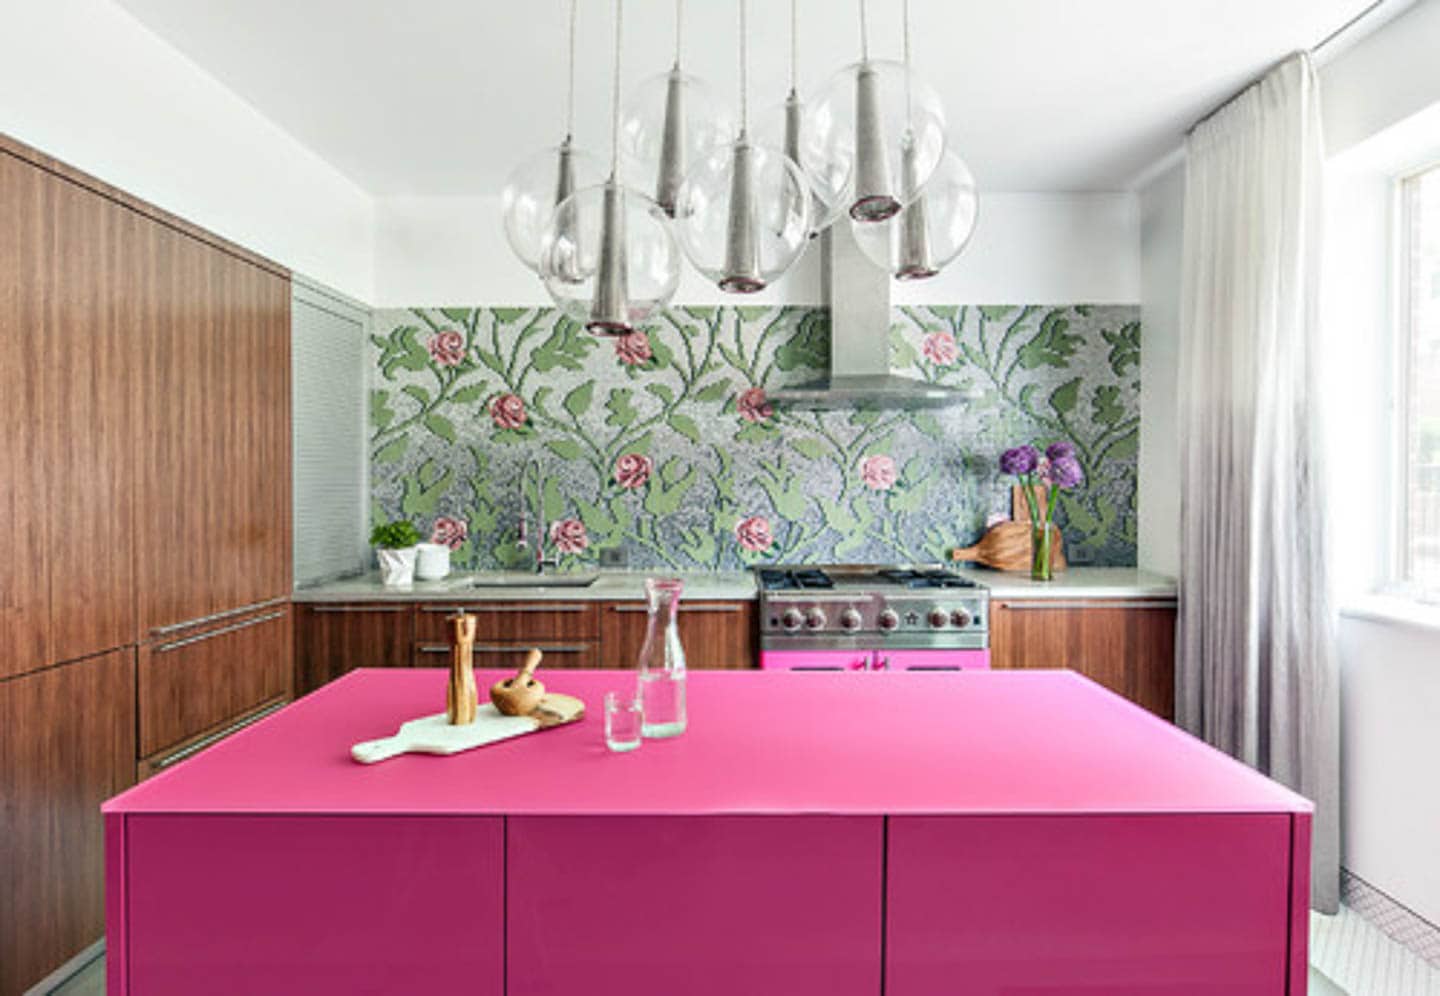 Kitchen with a floral motif glass backsplash, pink kitchen island and stove, and wood cabinets